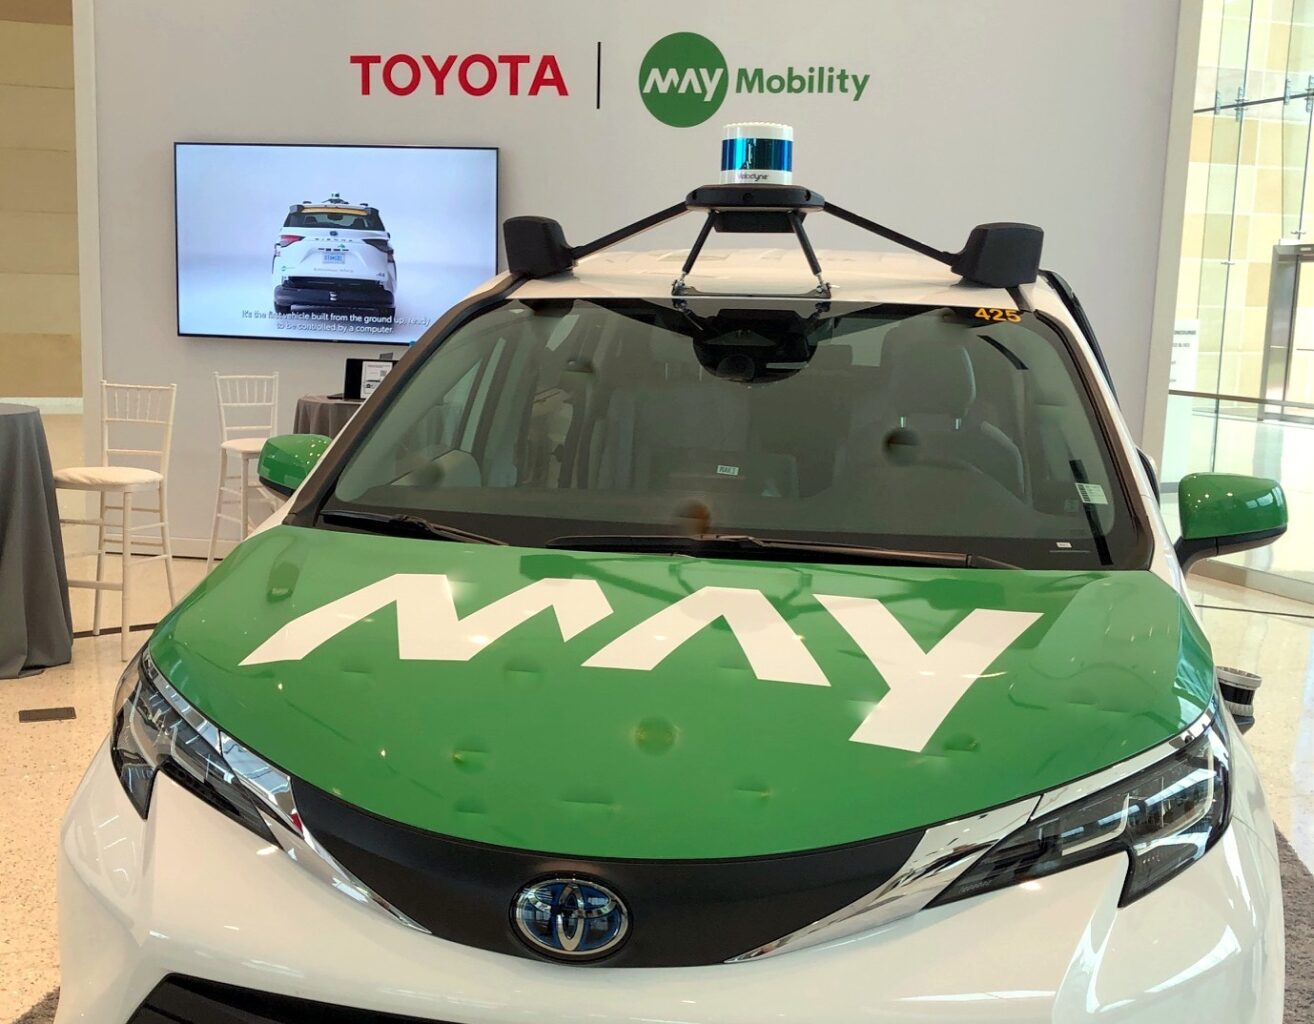 May Mobility Toyota Tech